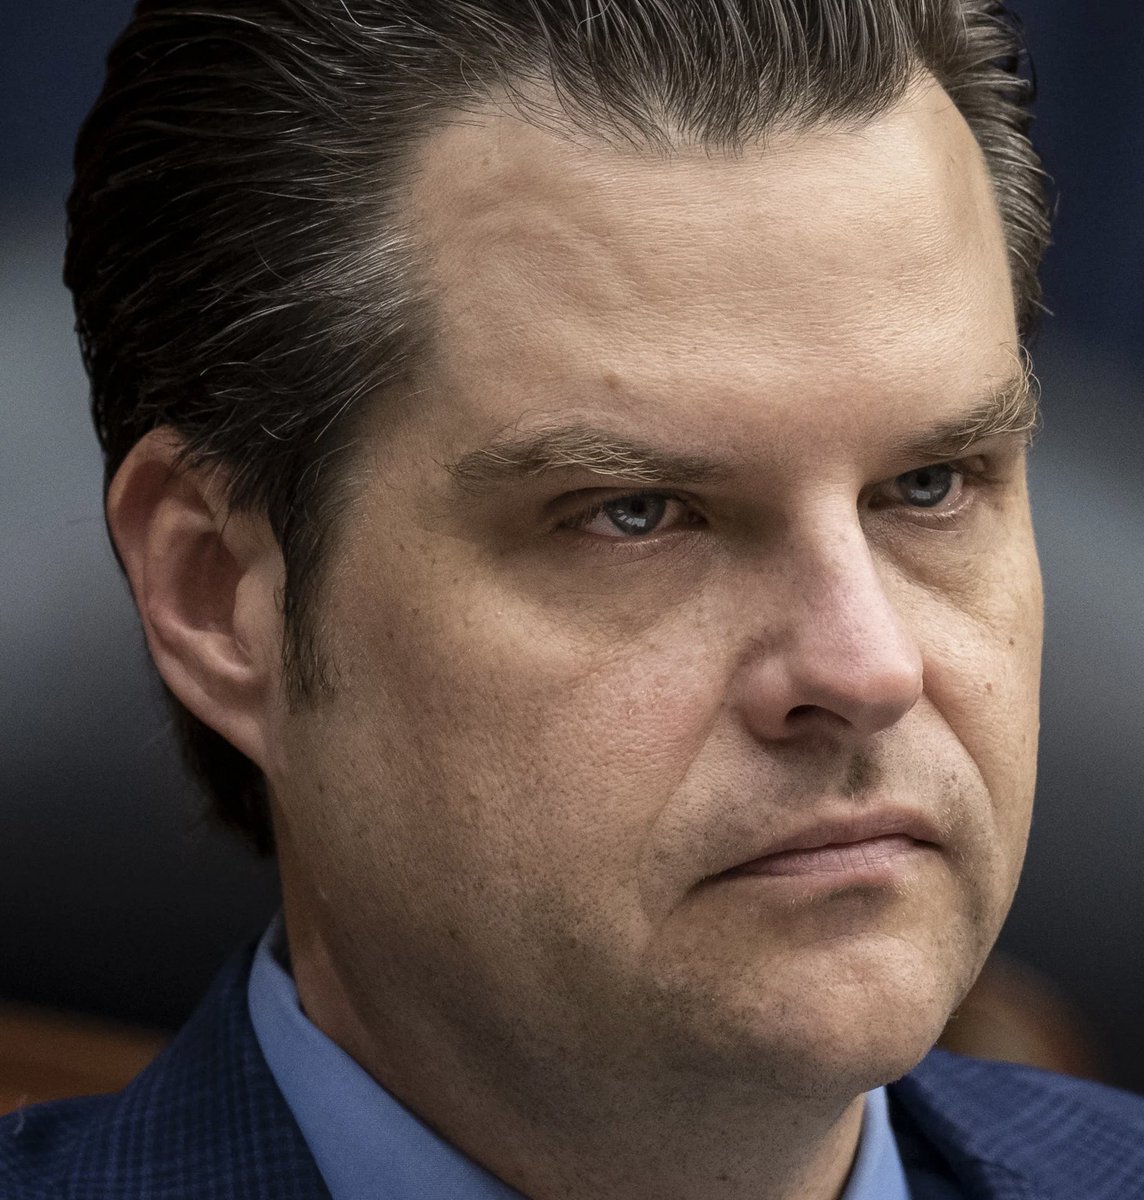 BREAKING: CNN drops bombshell on Trumper Congressman Matt Gaetz, reveals that Republican House Speaker Kevin McCarthy and his allies are preparing to launch a counterattack against Gaetz by “expelling” him from Congress for trying to launch a mutiny against McCarthy.

CNN reports